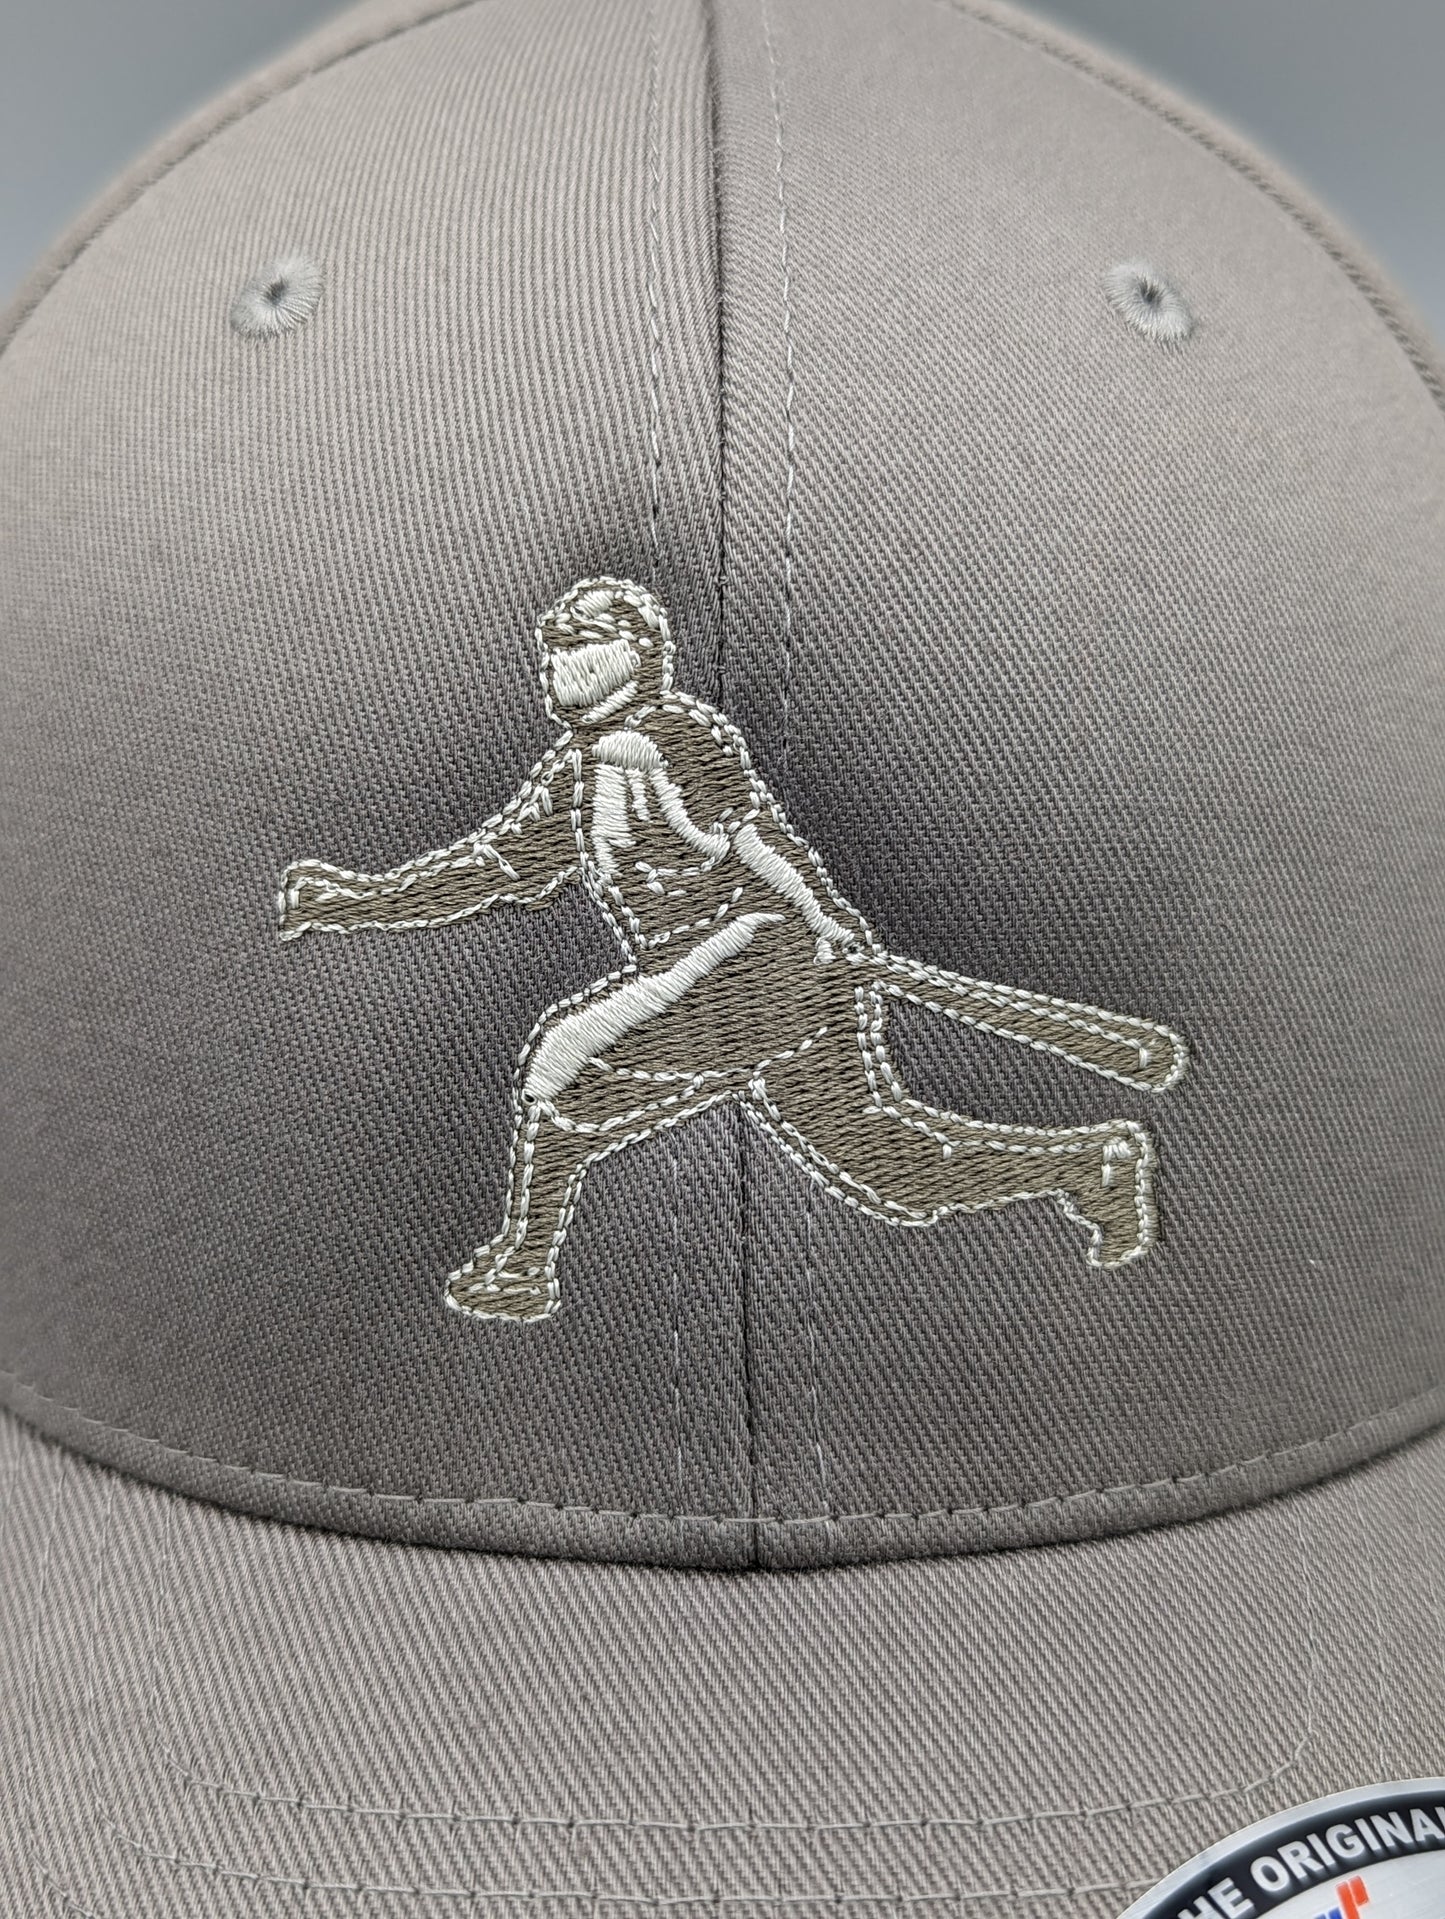 "The First Five" Limited Edition Flexfit Hat The Dutchman Honus Wagner